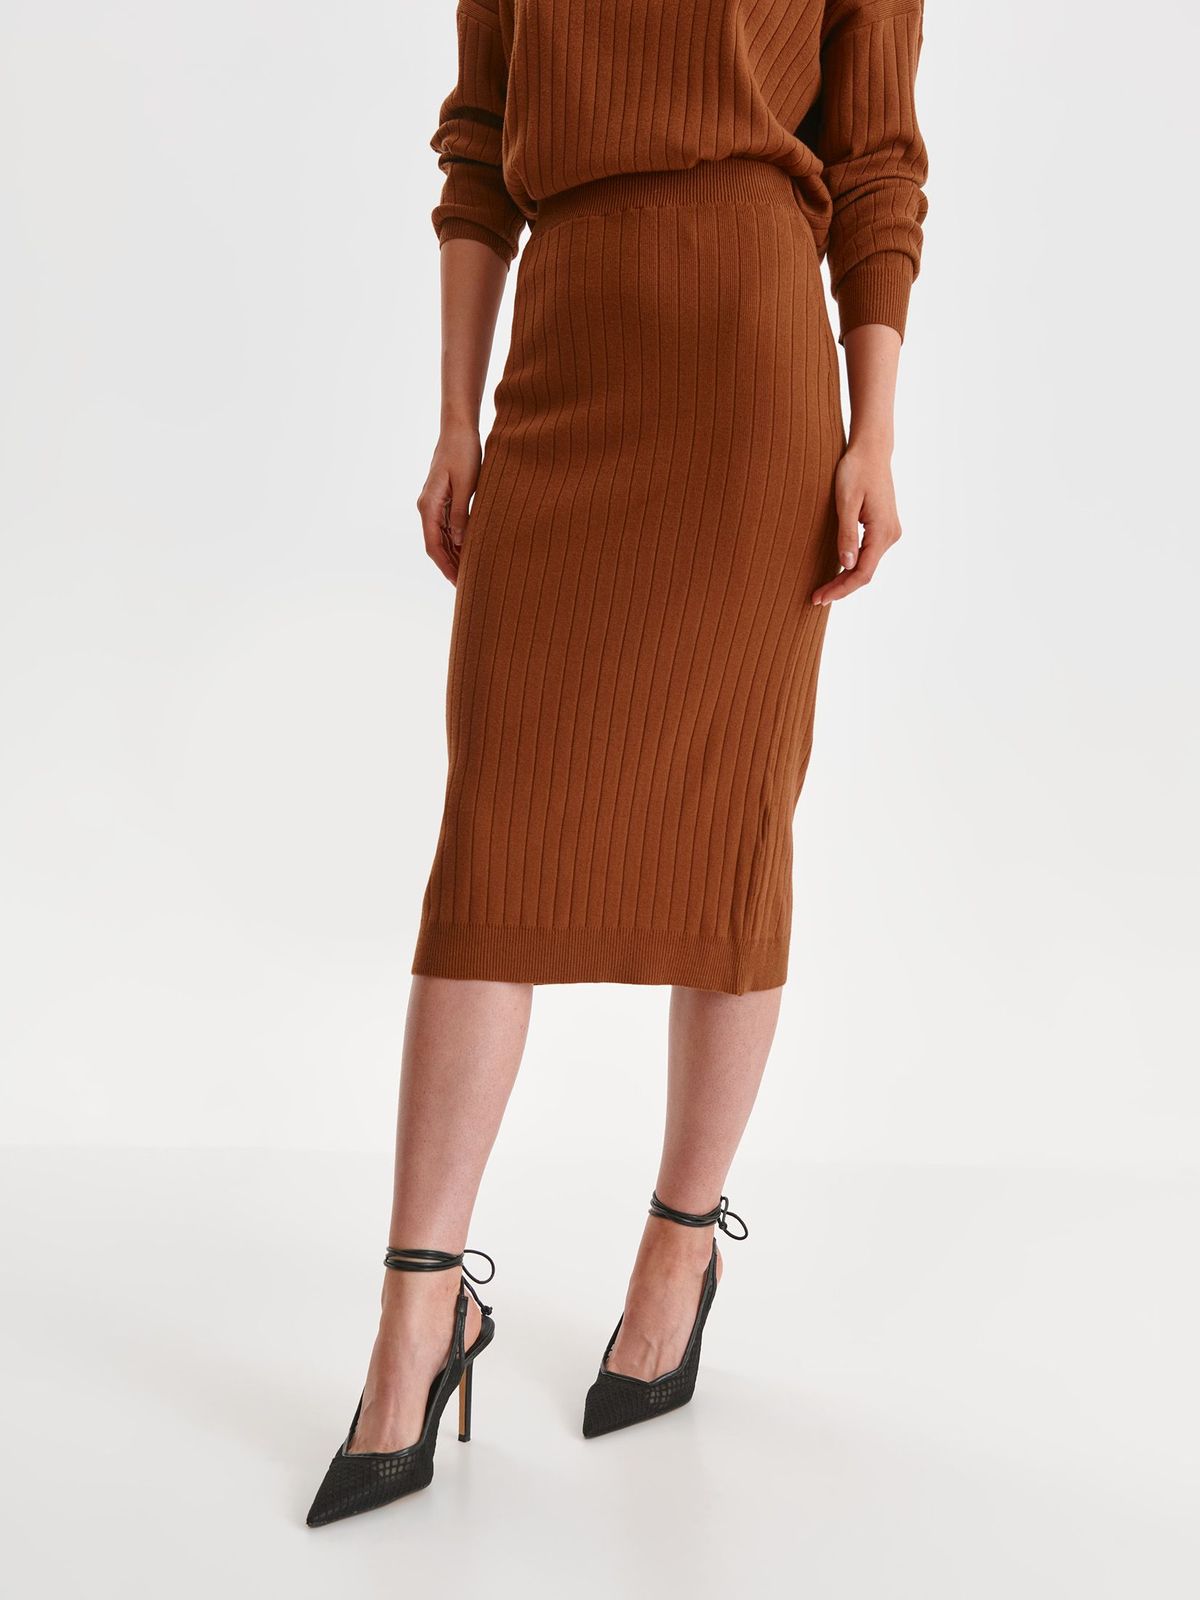 Brown skirt midi pencil from striped fabric